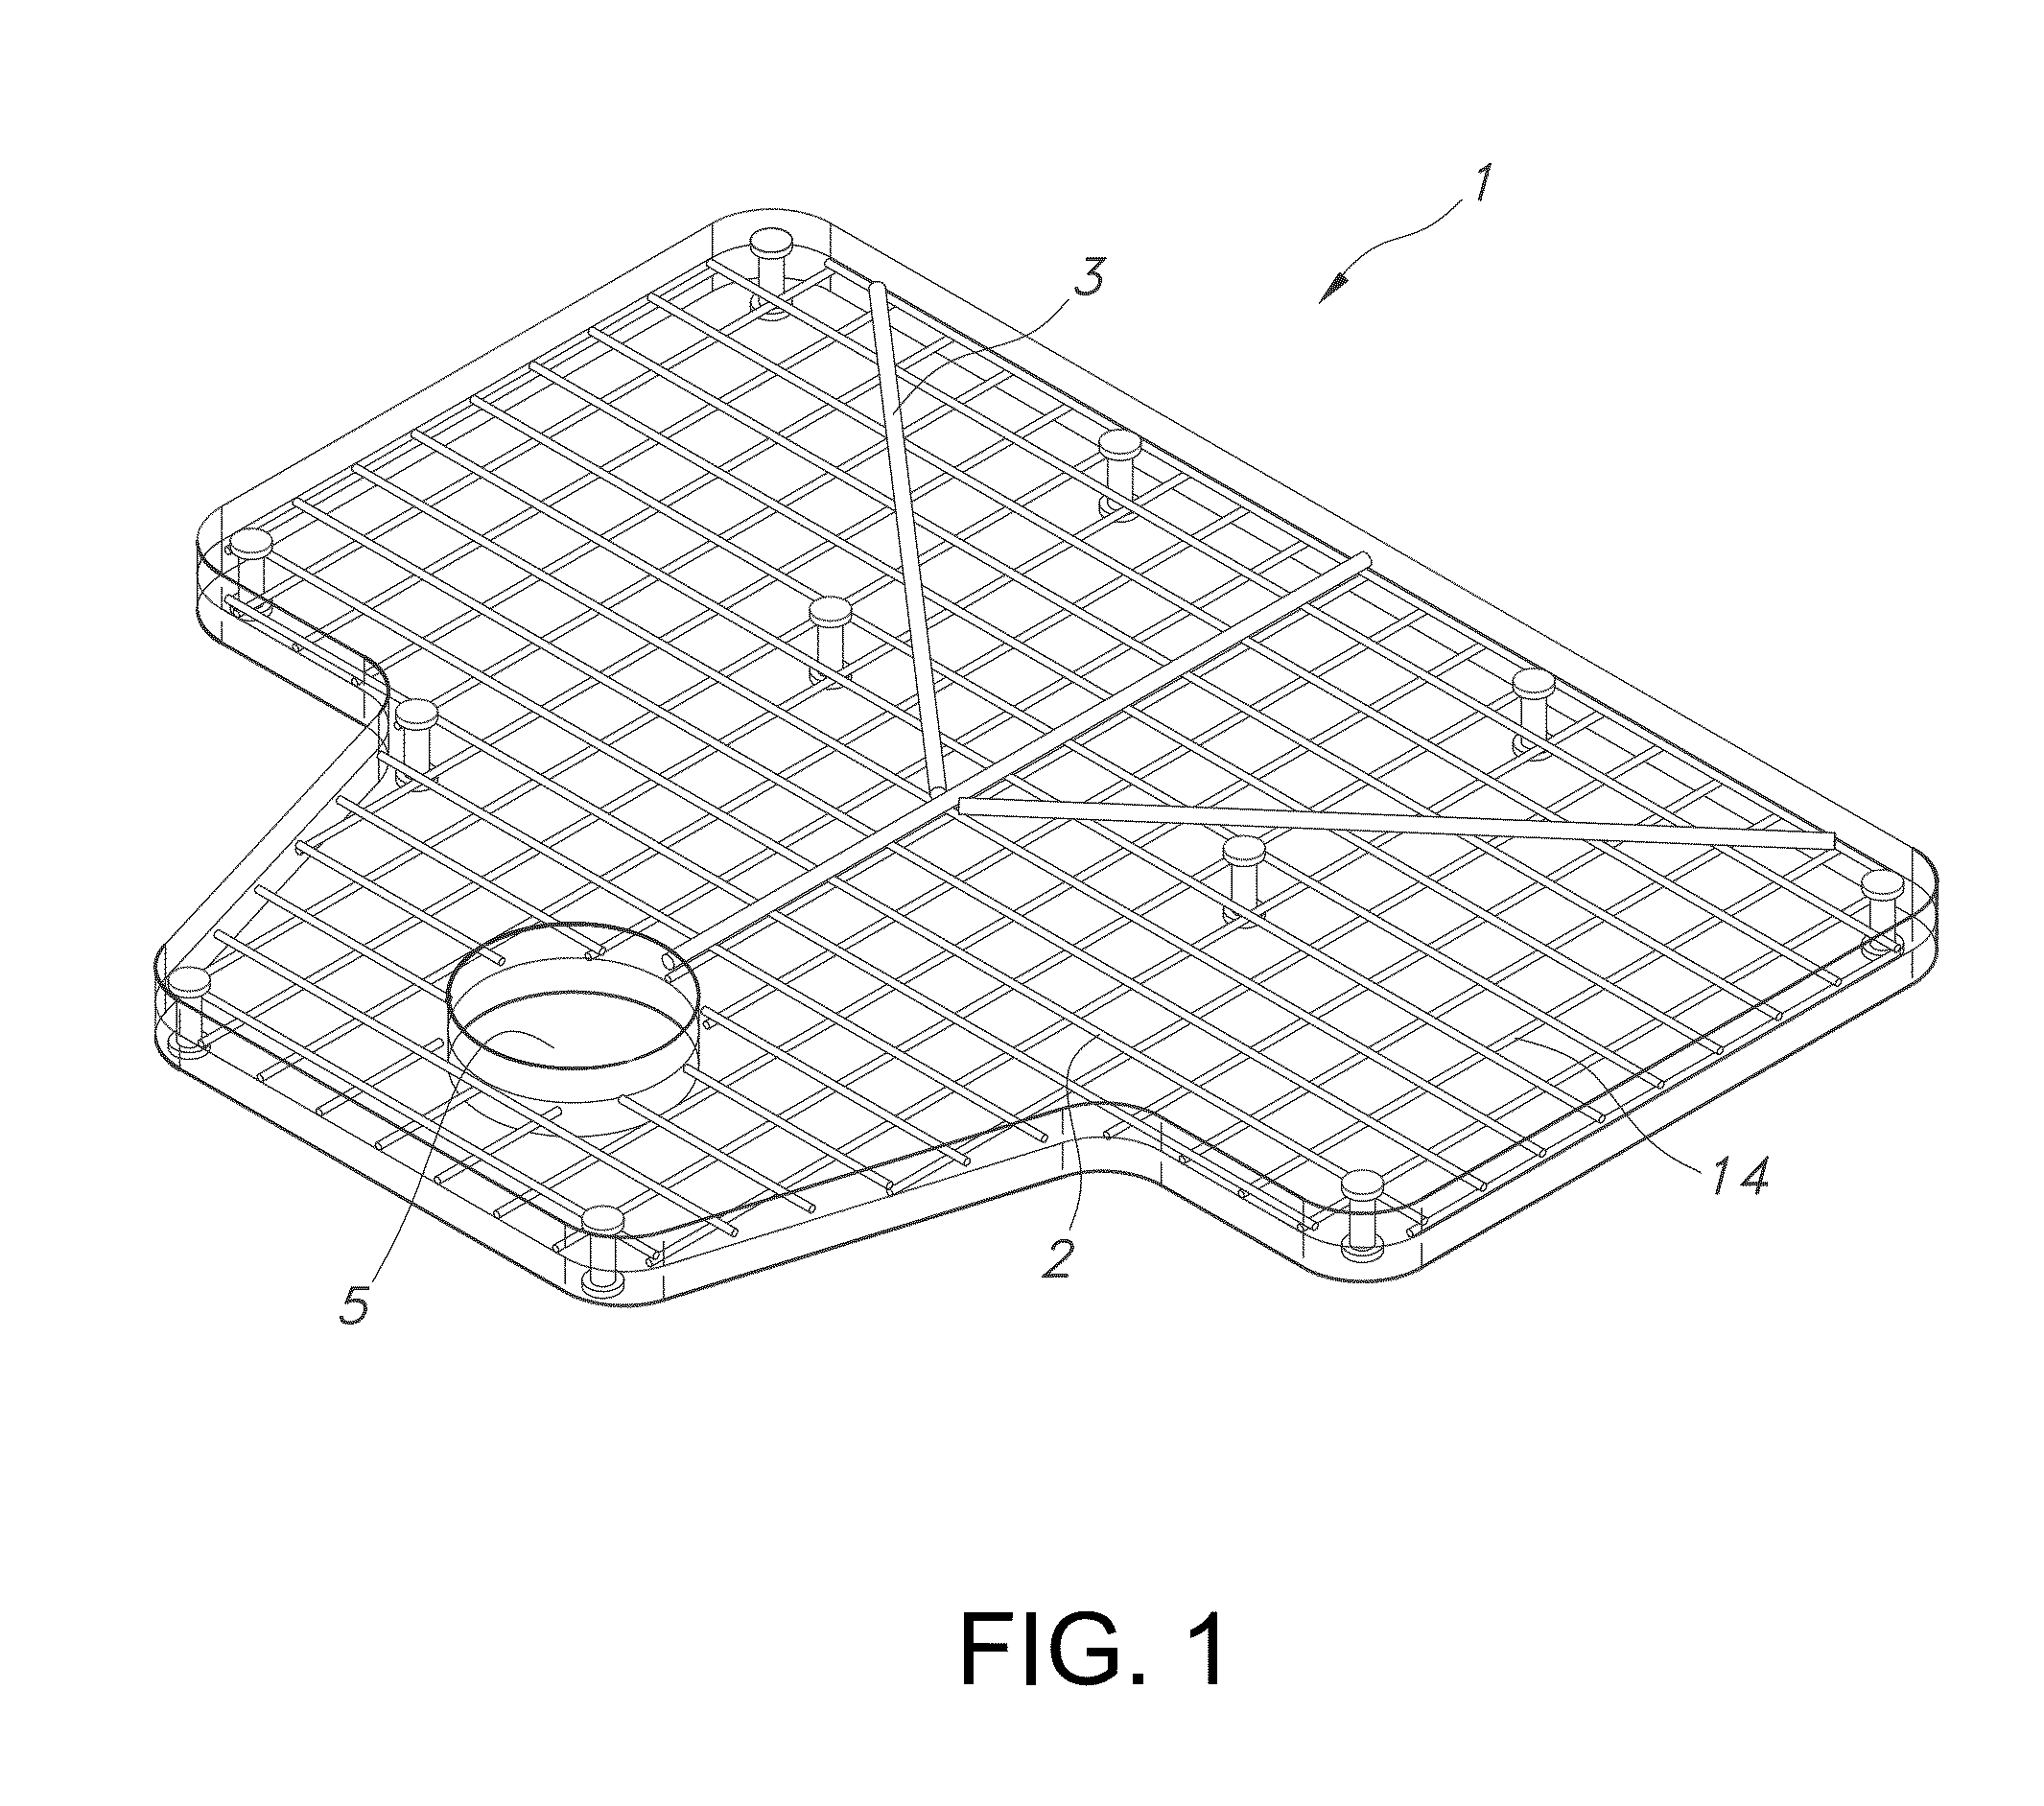 Grid patterned alignment plate for imaging apparatus and method of providing implant placement